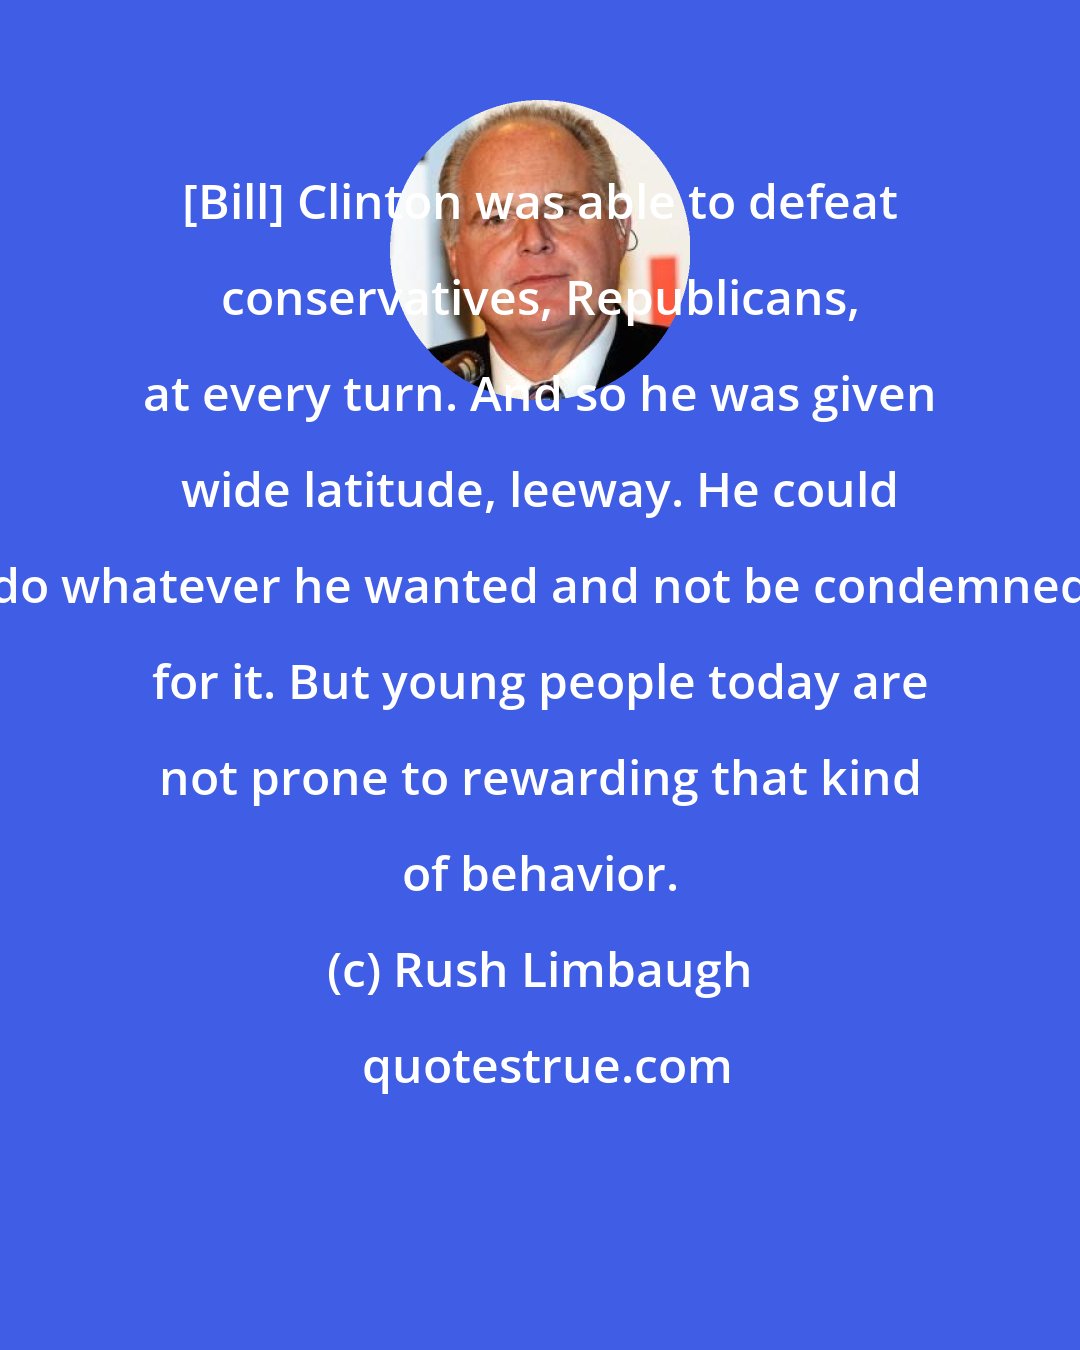 Rush Limbaugh: [Bill] Clinton was able to defeat conservatives, Republicans, at every turn. And so he was given wide latitude, leeway. He could do whatever he wanted and not be condemned for it. But young people today are not prone to rewarding that kind of behavior.